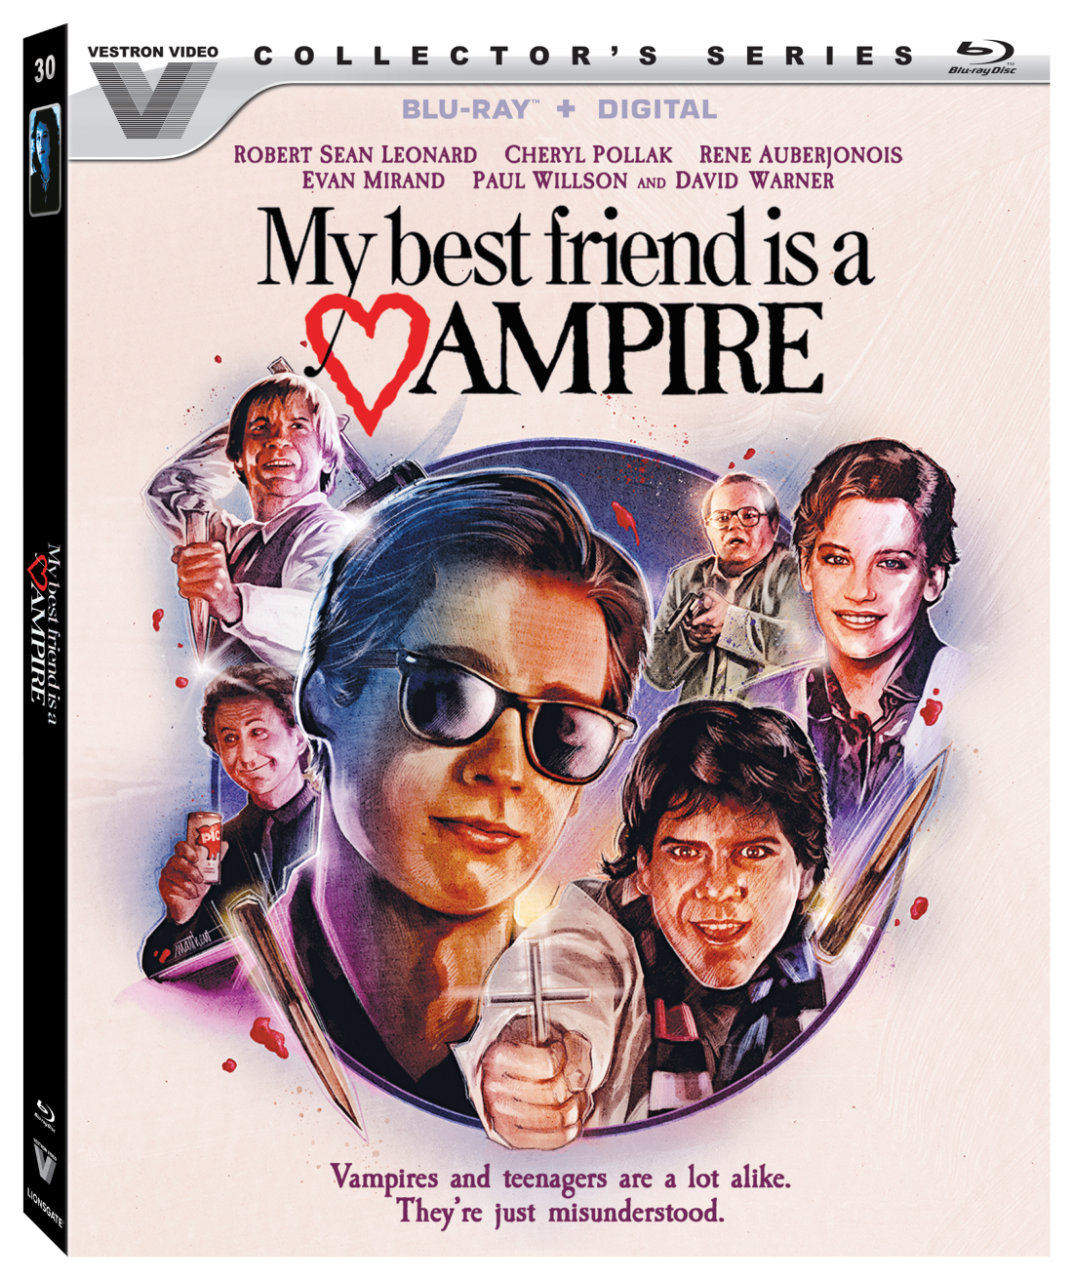 My Best Friend Is A Vampire Blu-Ray Combo Pack cover (Lionsgate)